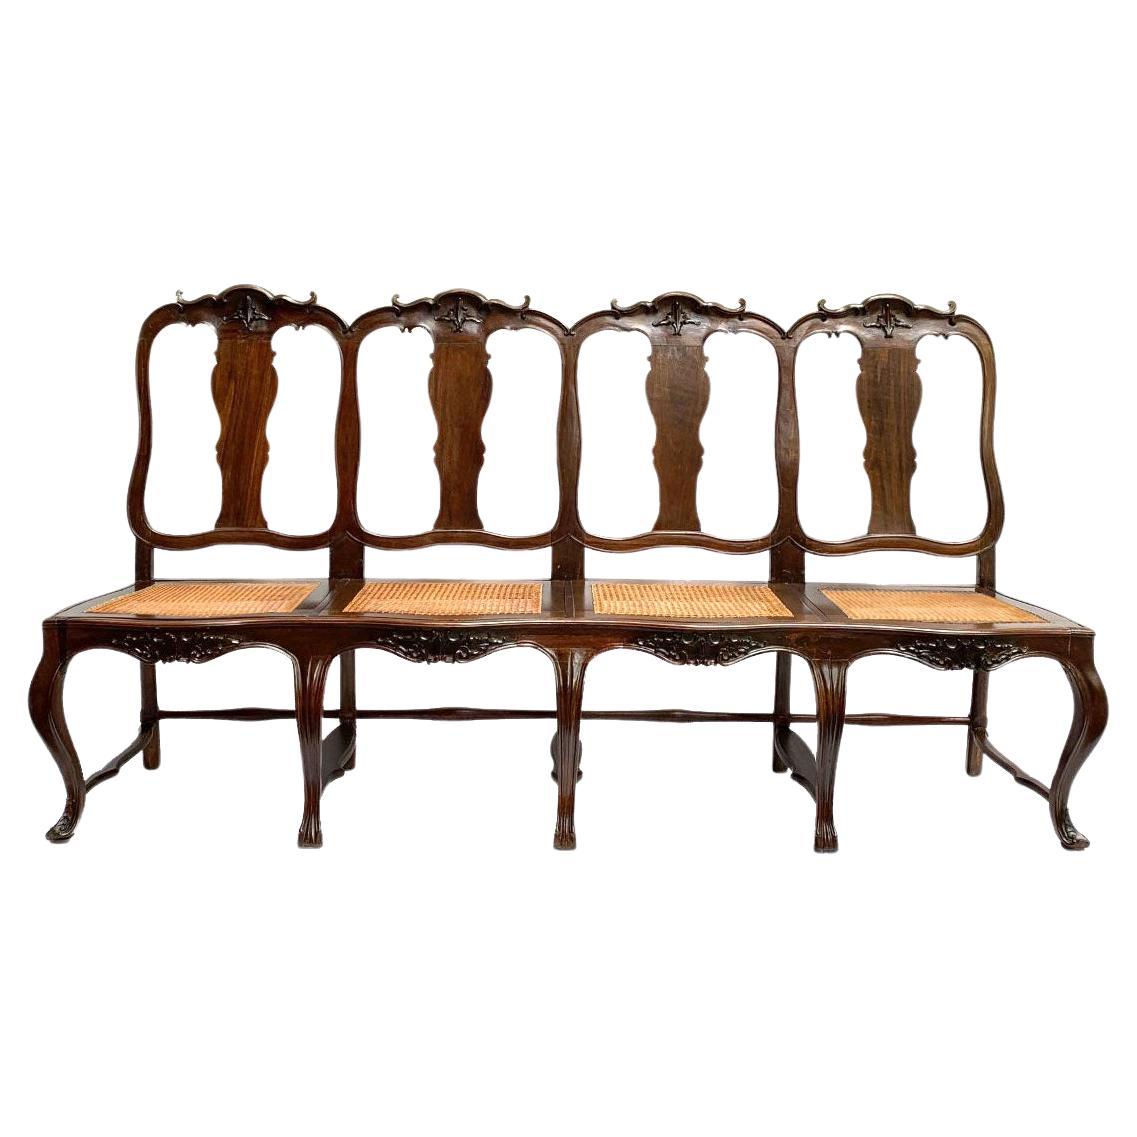 Magnificent 18th Century South American Colonial Escaño Settee  For Sale